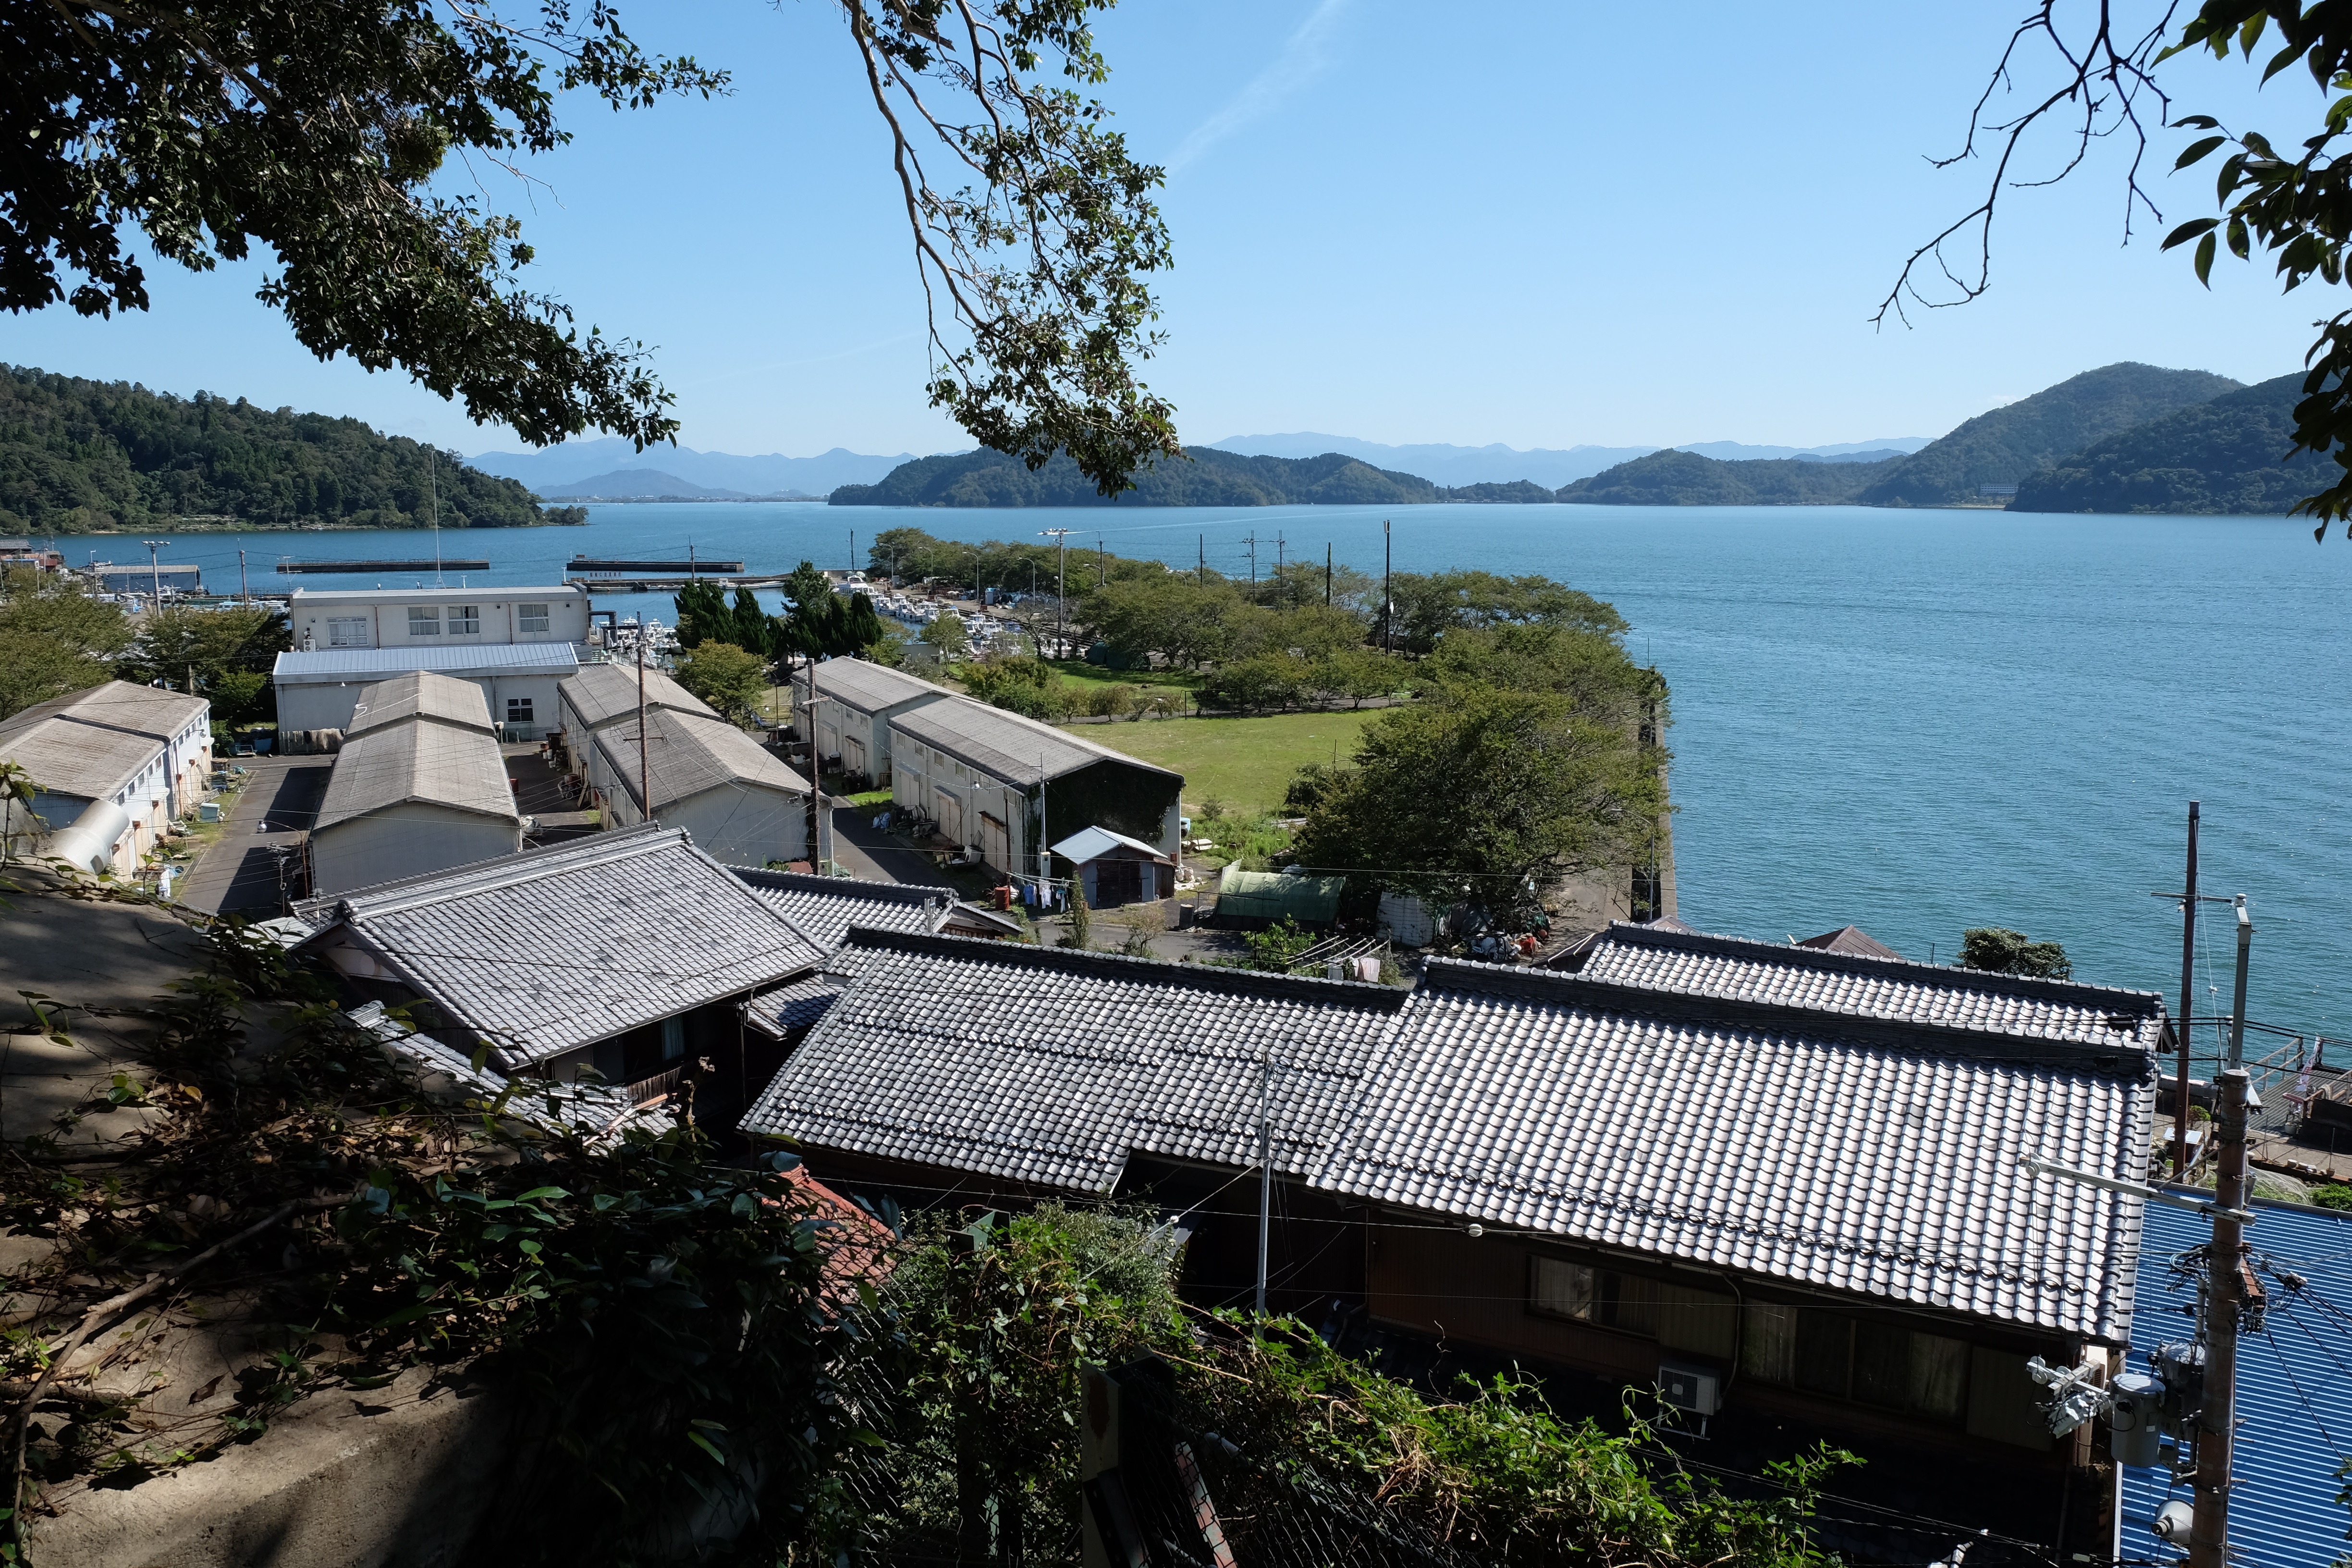 The fishing village on Okishima, the largest island in Lake Biwa. About 250 people live on the island, which covers 1.51 km<sup>2</sup>, and reaches 225 m above sea level. (8 October 2018)